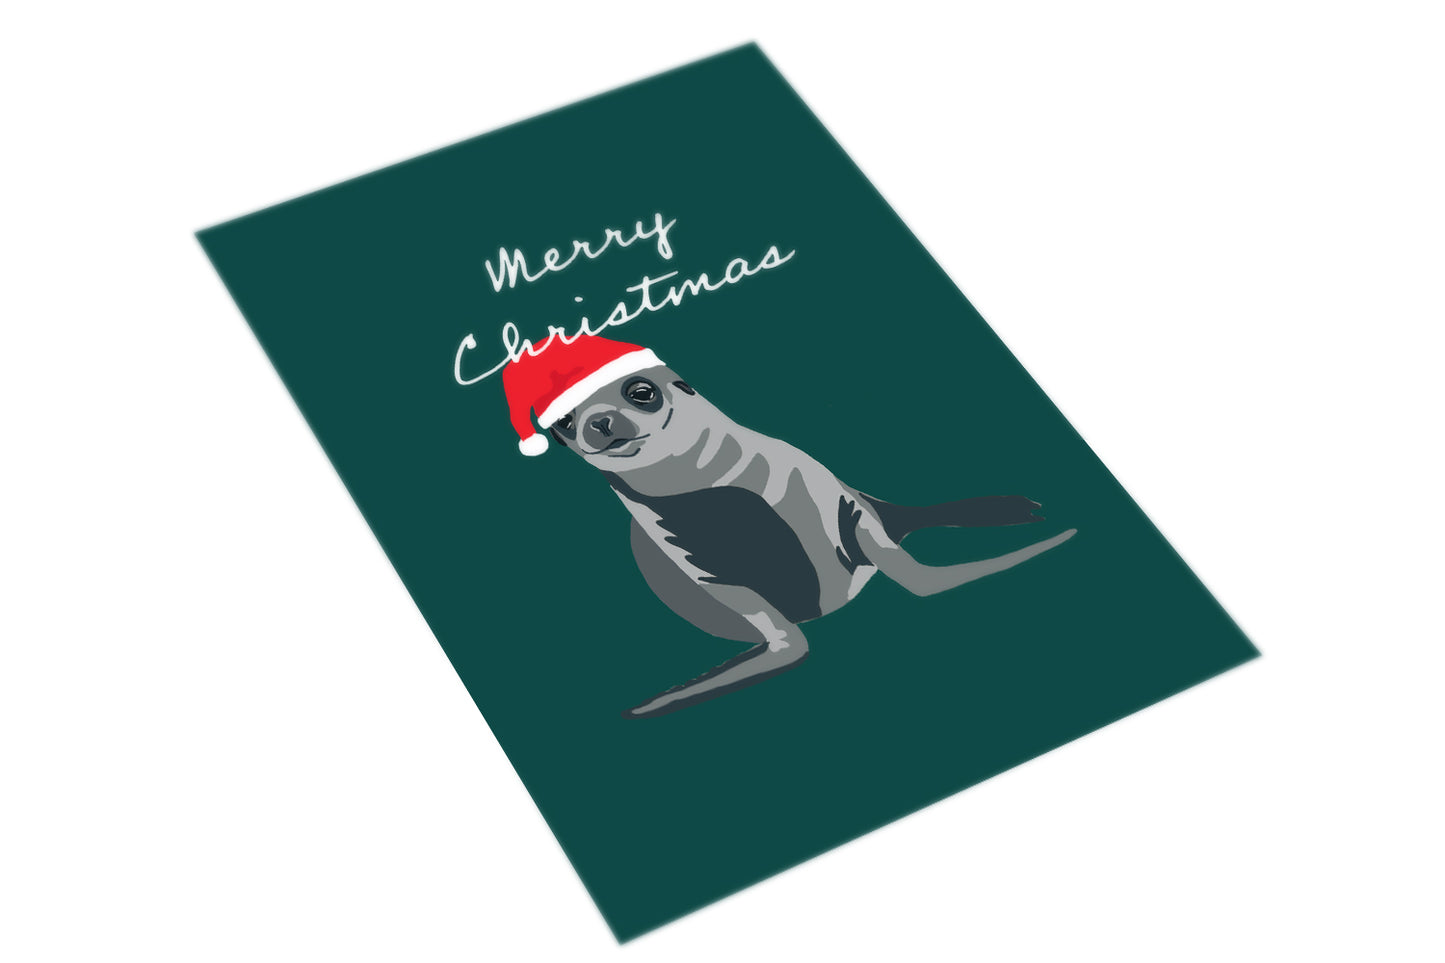 Christmas Seal - The Paper People Greeting Cards